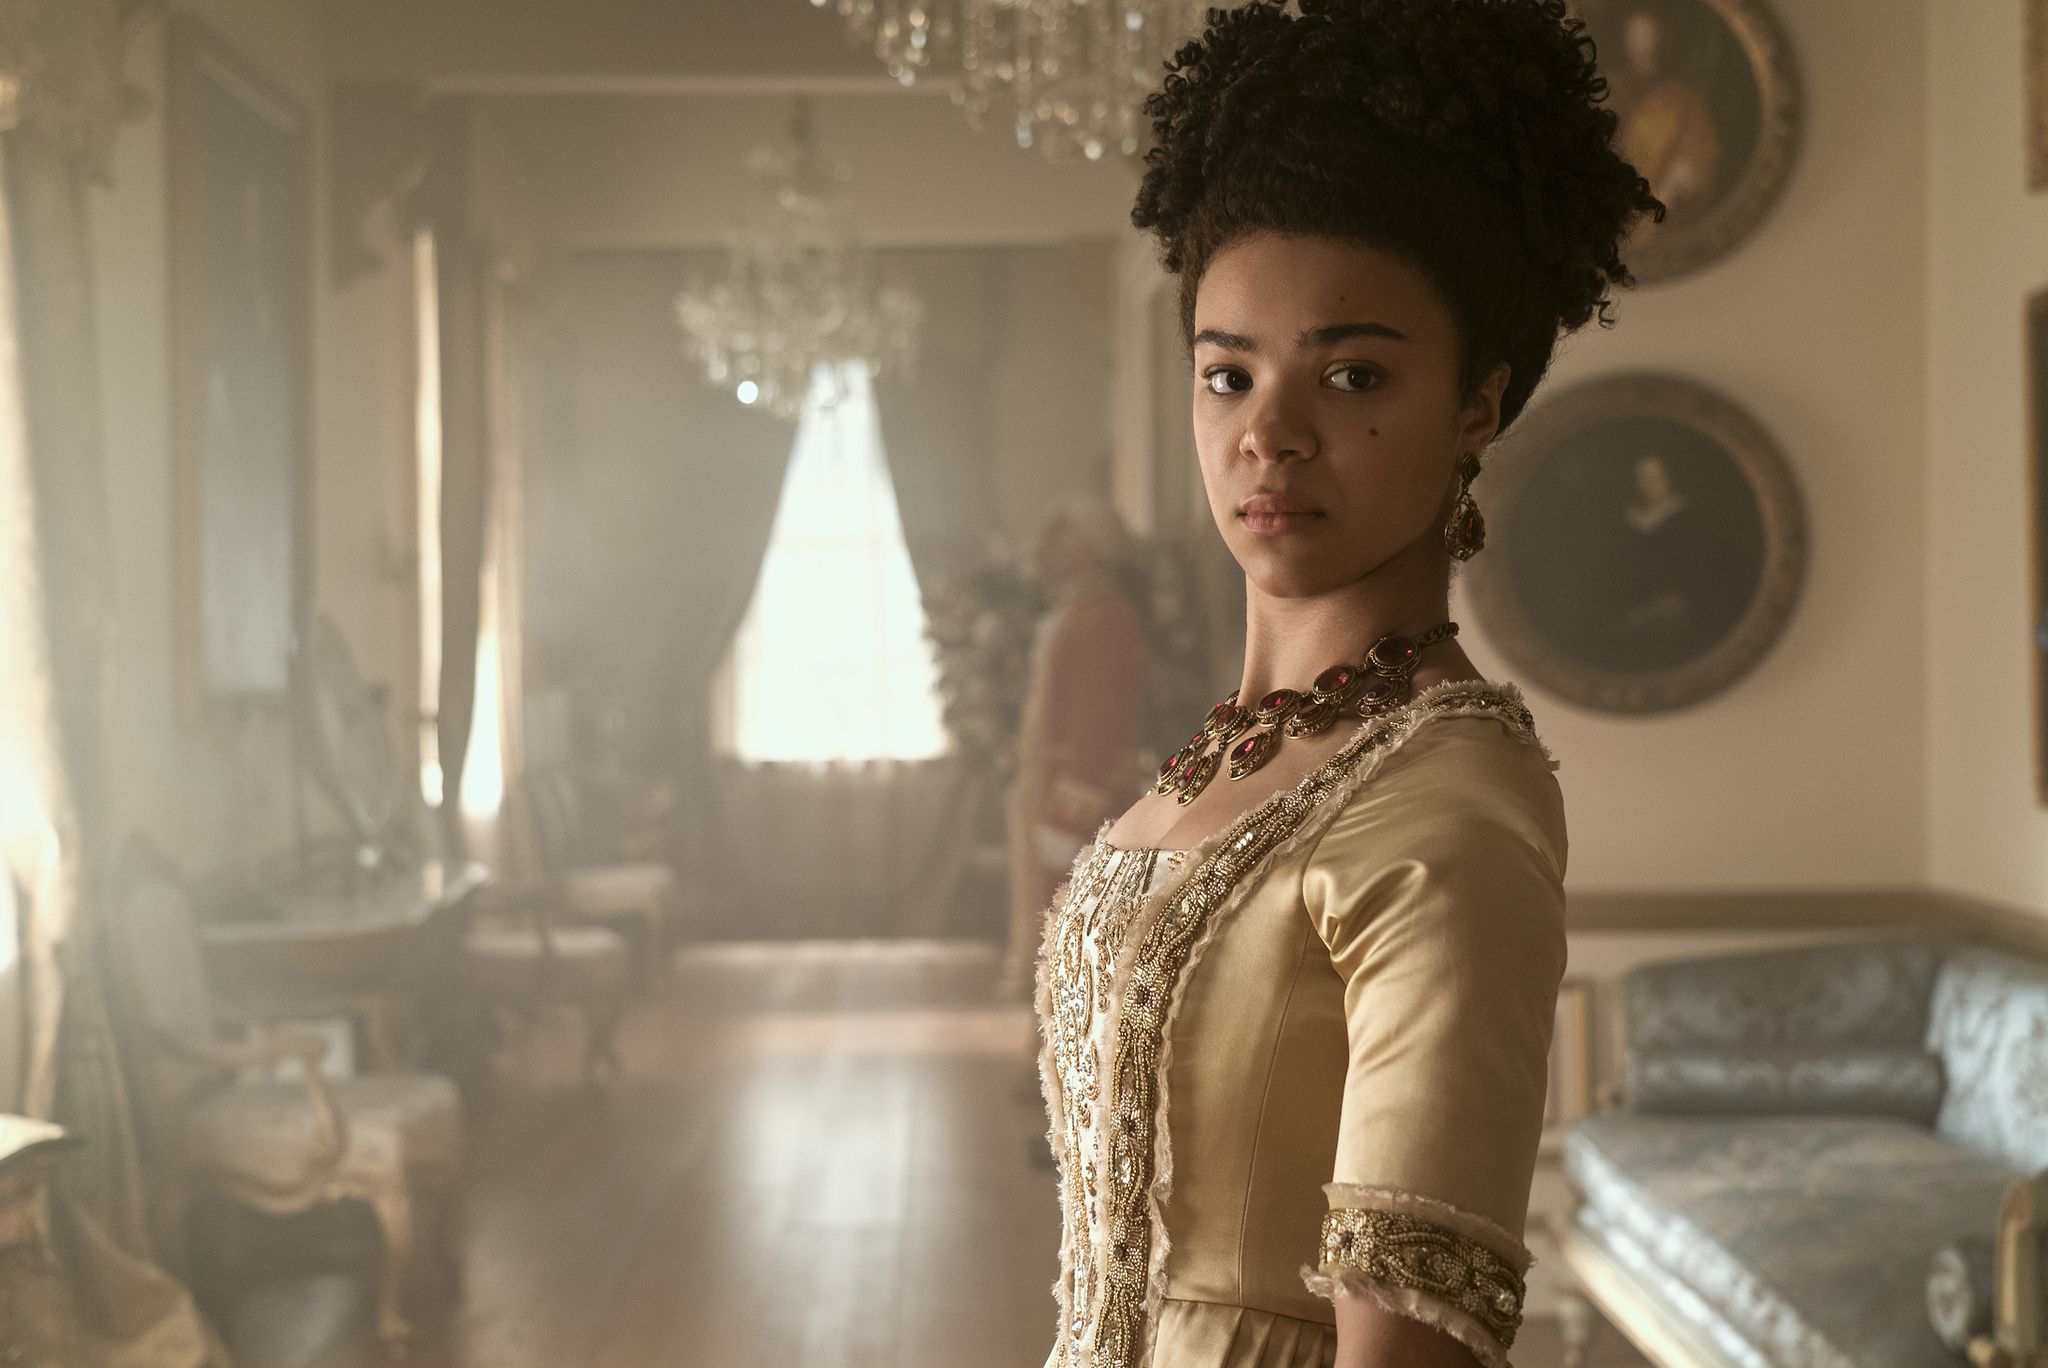 queen charlotte a bridgerton story india amarteifio as young queen charlotte in episode 103 of queen charlotte a bridgerton story cr liam danielnetflix © 2023